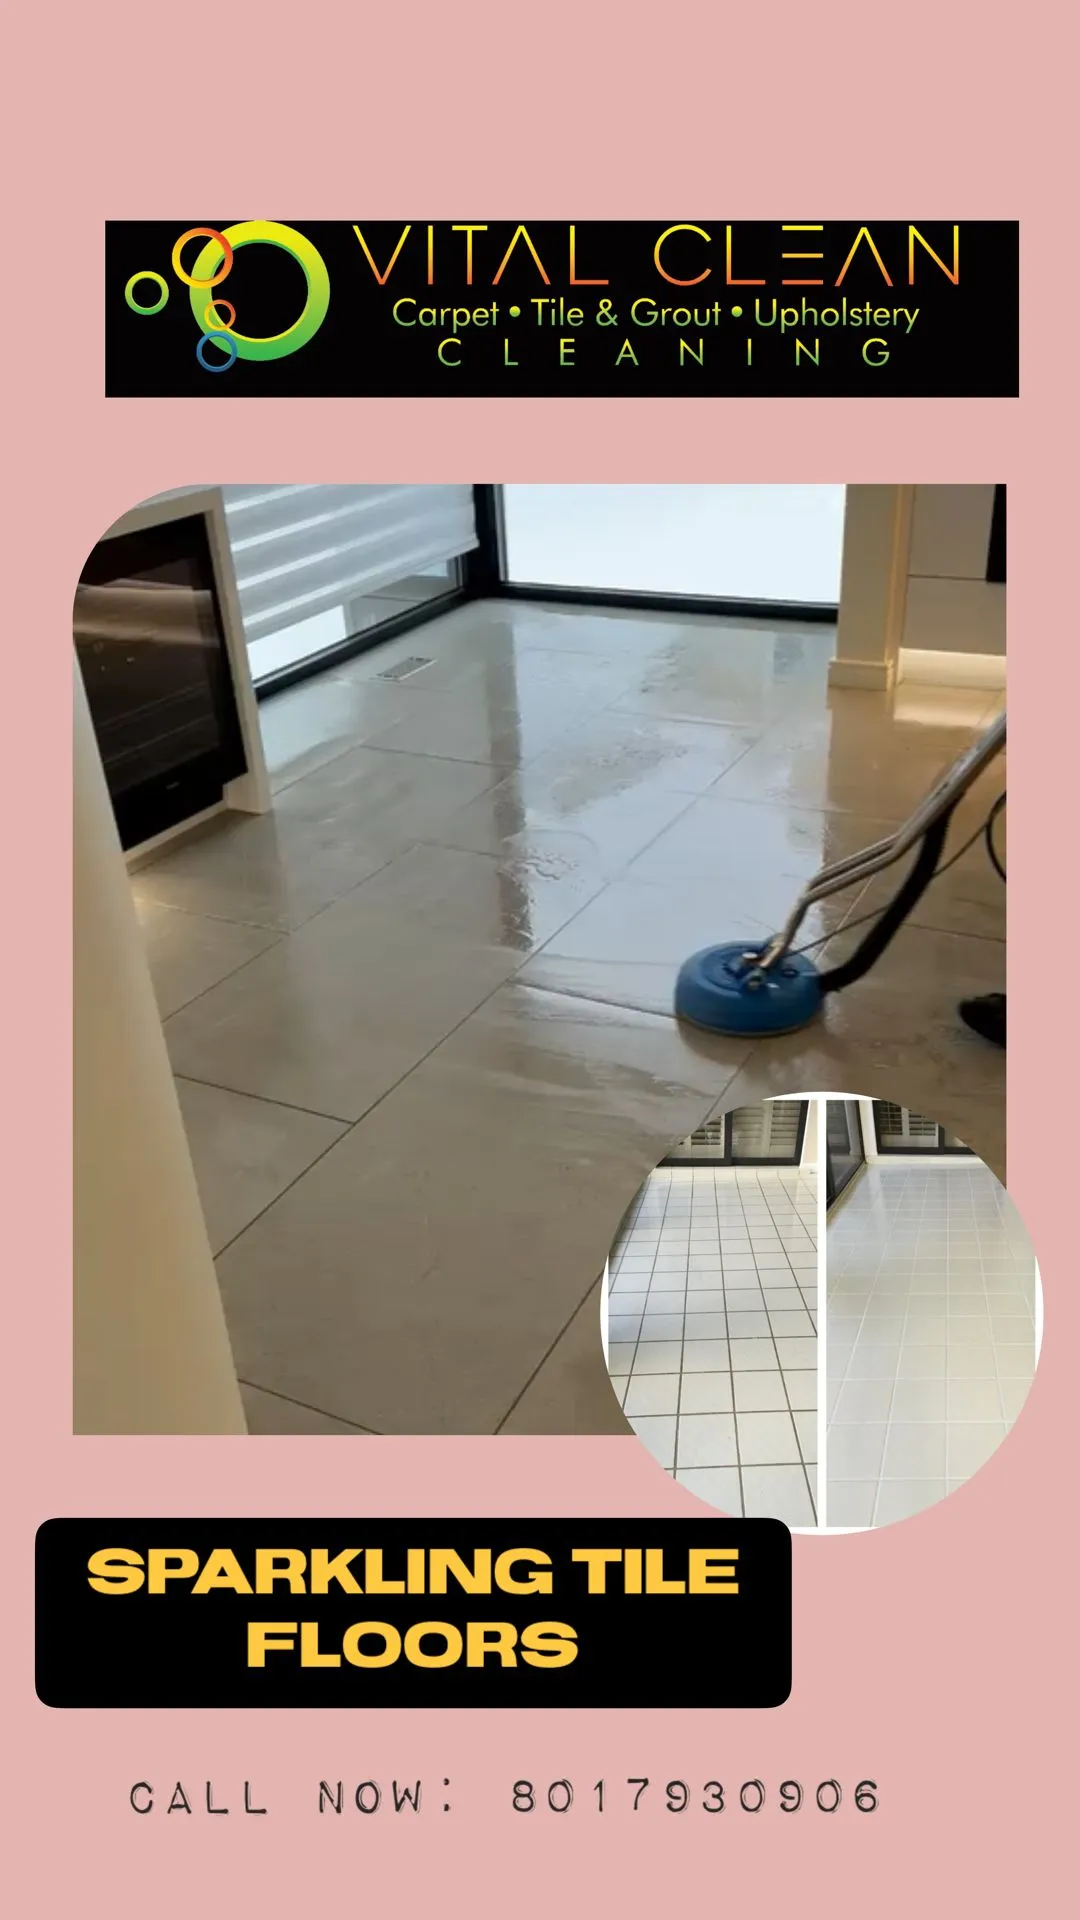 Top Commercial Cleaning Service in Salt Lake City